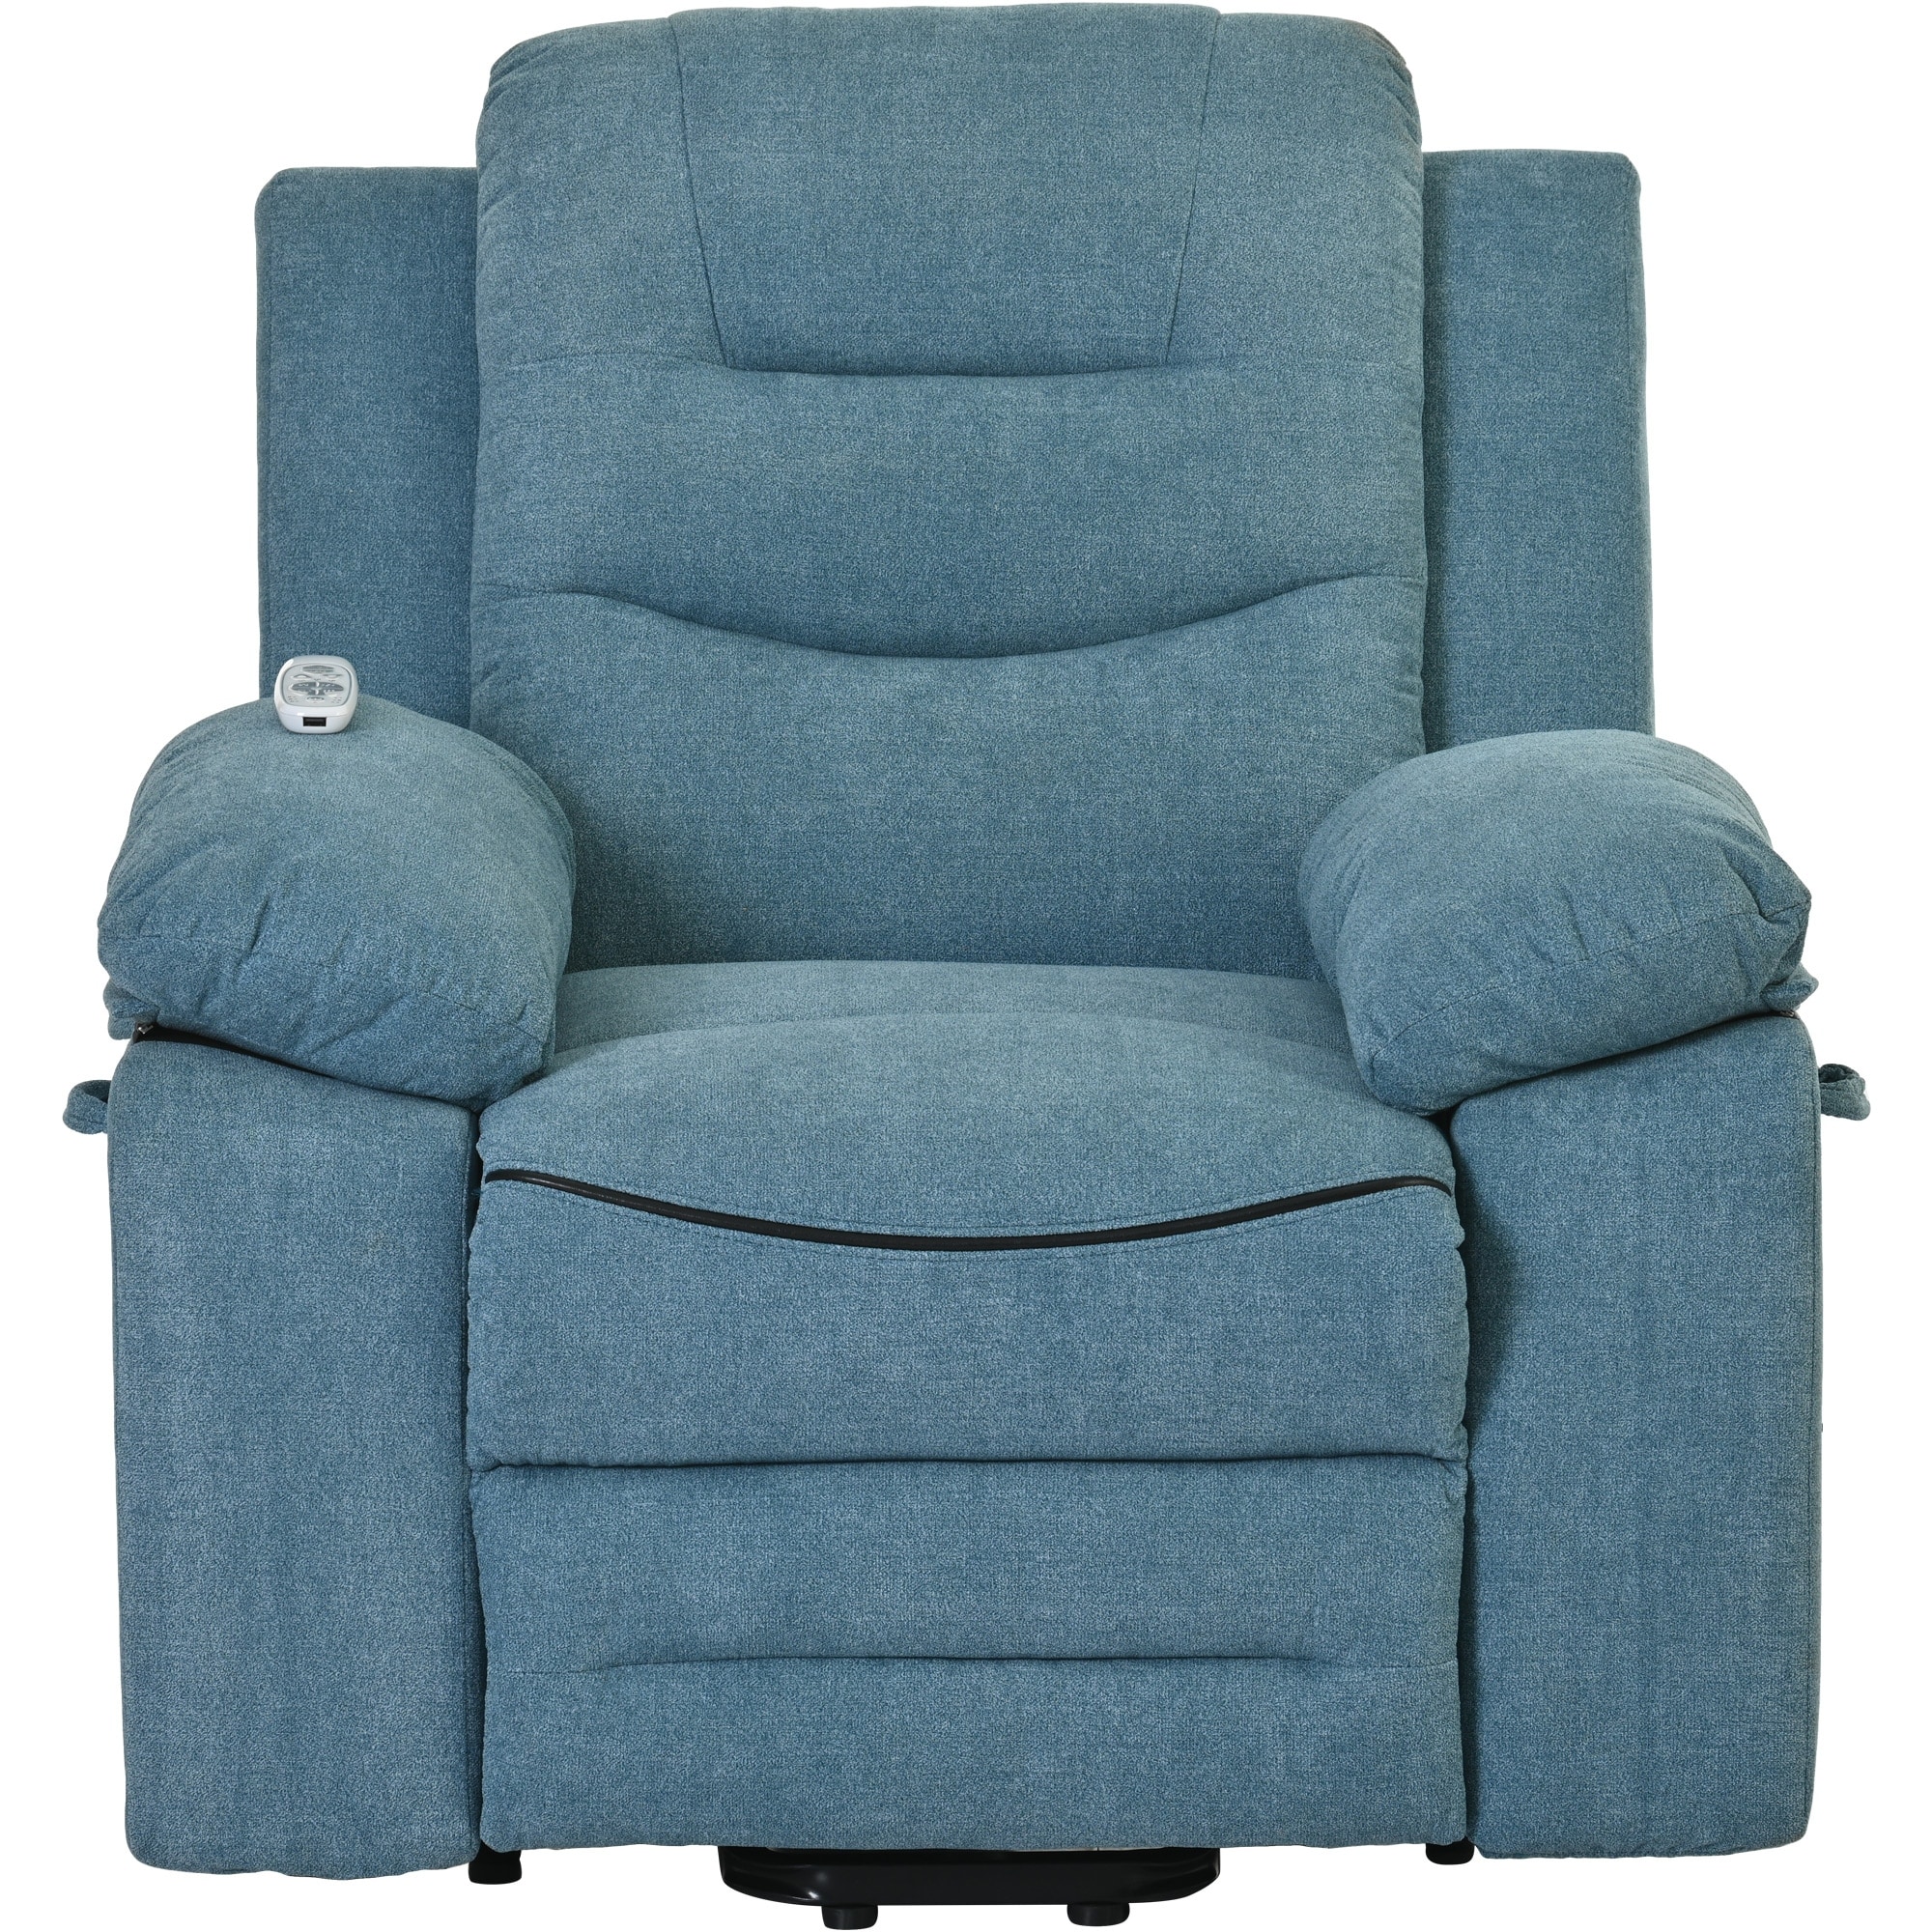 https://ak1.ostkcdn.com/images/products/is/images/direct/5b61f678edf1bf64f9991761482316c6a4ab465c/Blue-Linen-Power-Lift-Chair-for-Elderly-with-Adjustable-Massage.jpg